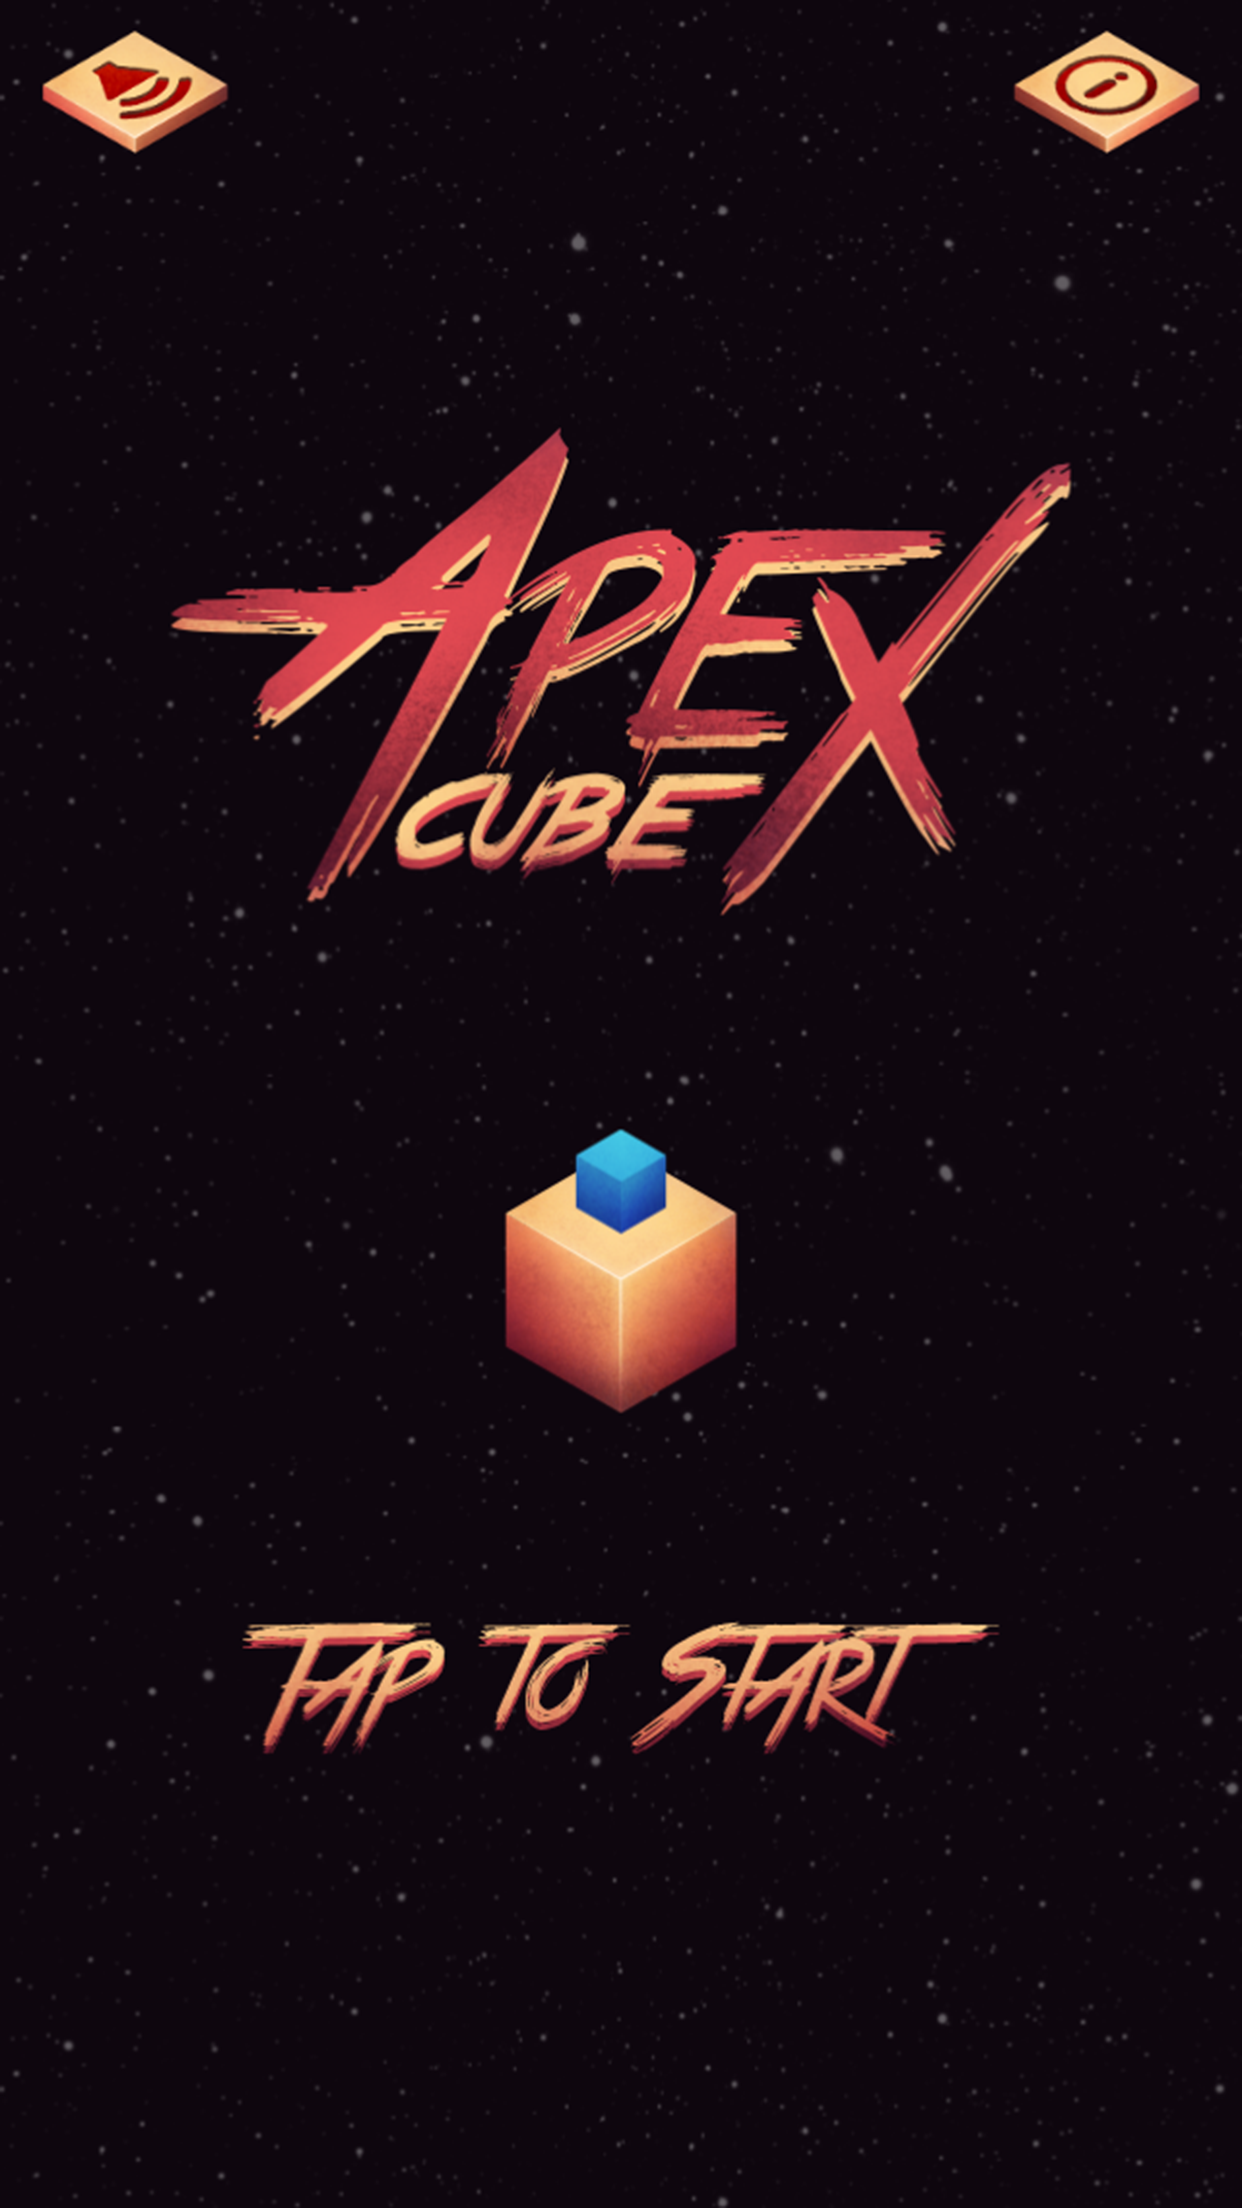 Apex Cube - Jump to the top FREE